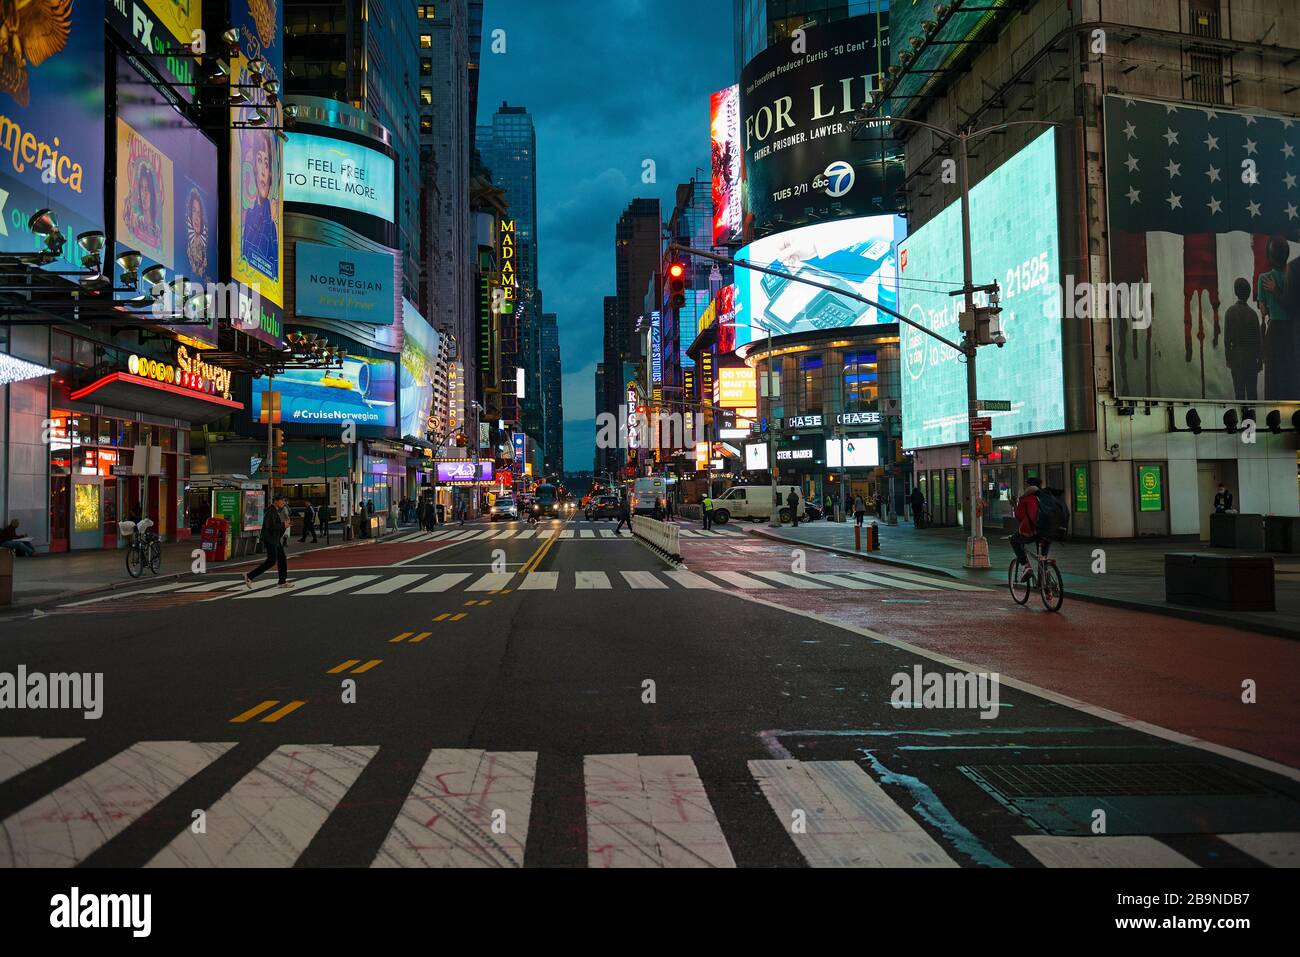 42nd Street in Times Square on March 20th, at 6:15 pm during what should be rush hour during the Covid-19 Coronavirus outbreak in New York City, Stock Photo